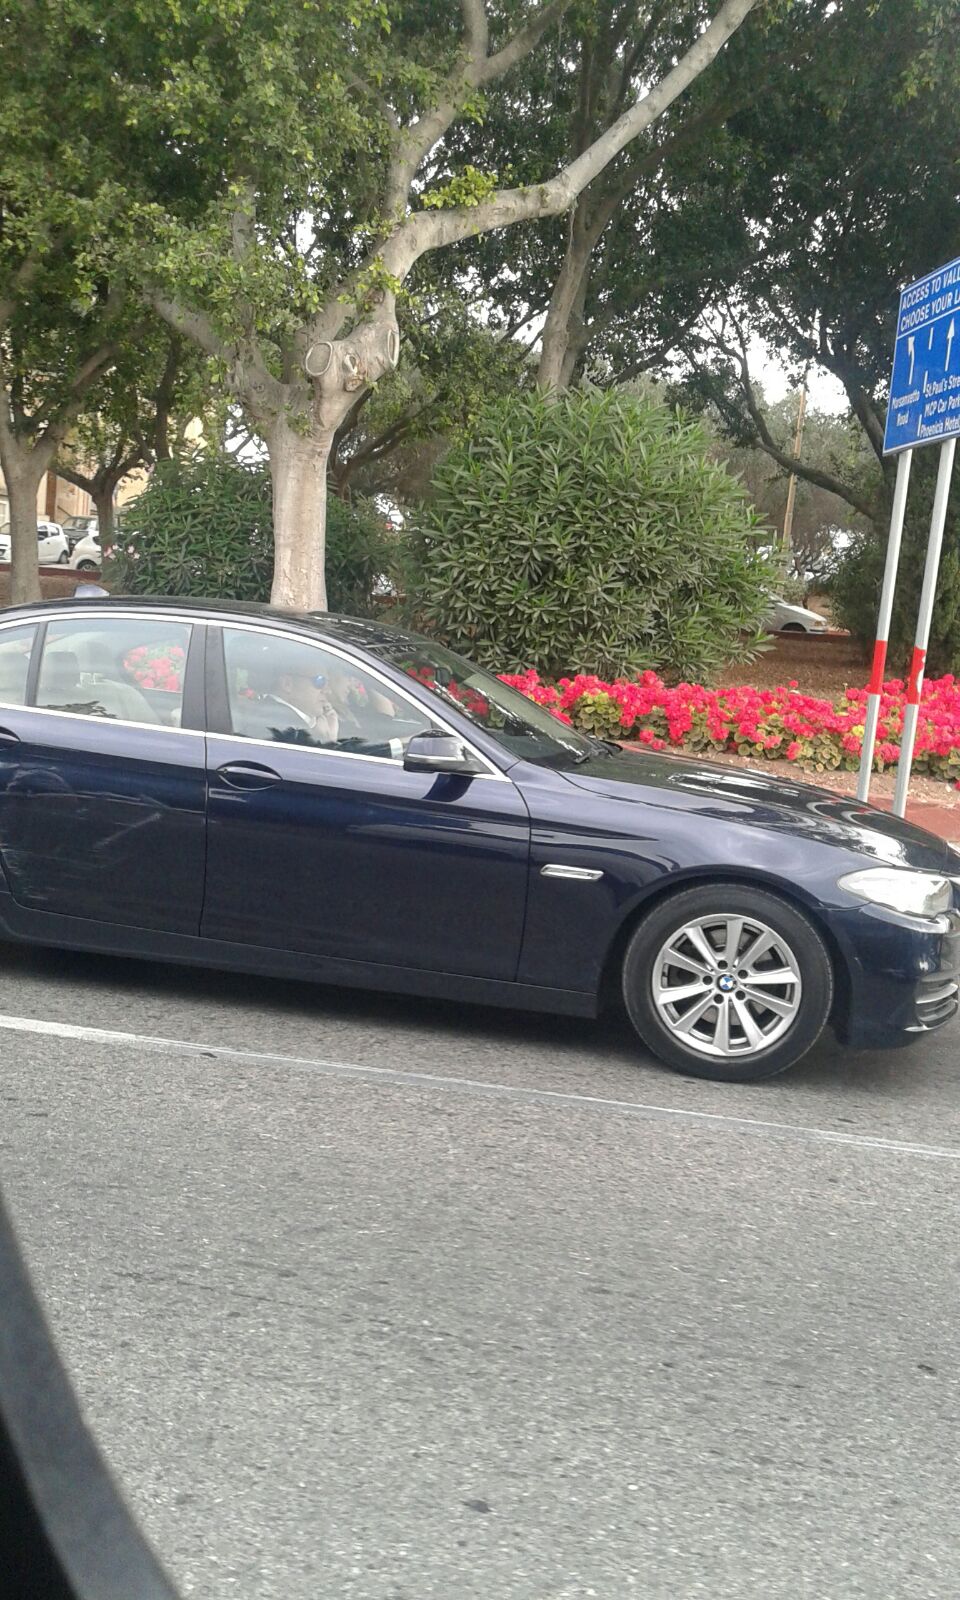 Photograph taken last June, showing the Economy Minister driving his heavily dented official car in the direction of his office, at 9am, with Dana Farrugia in the passenger seat.